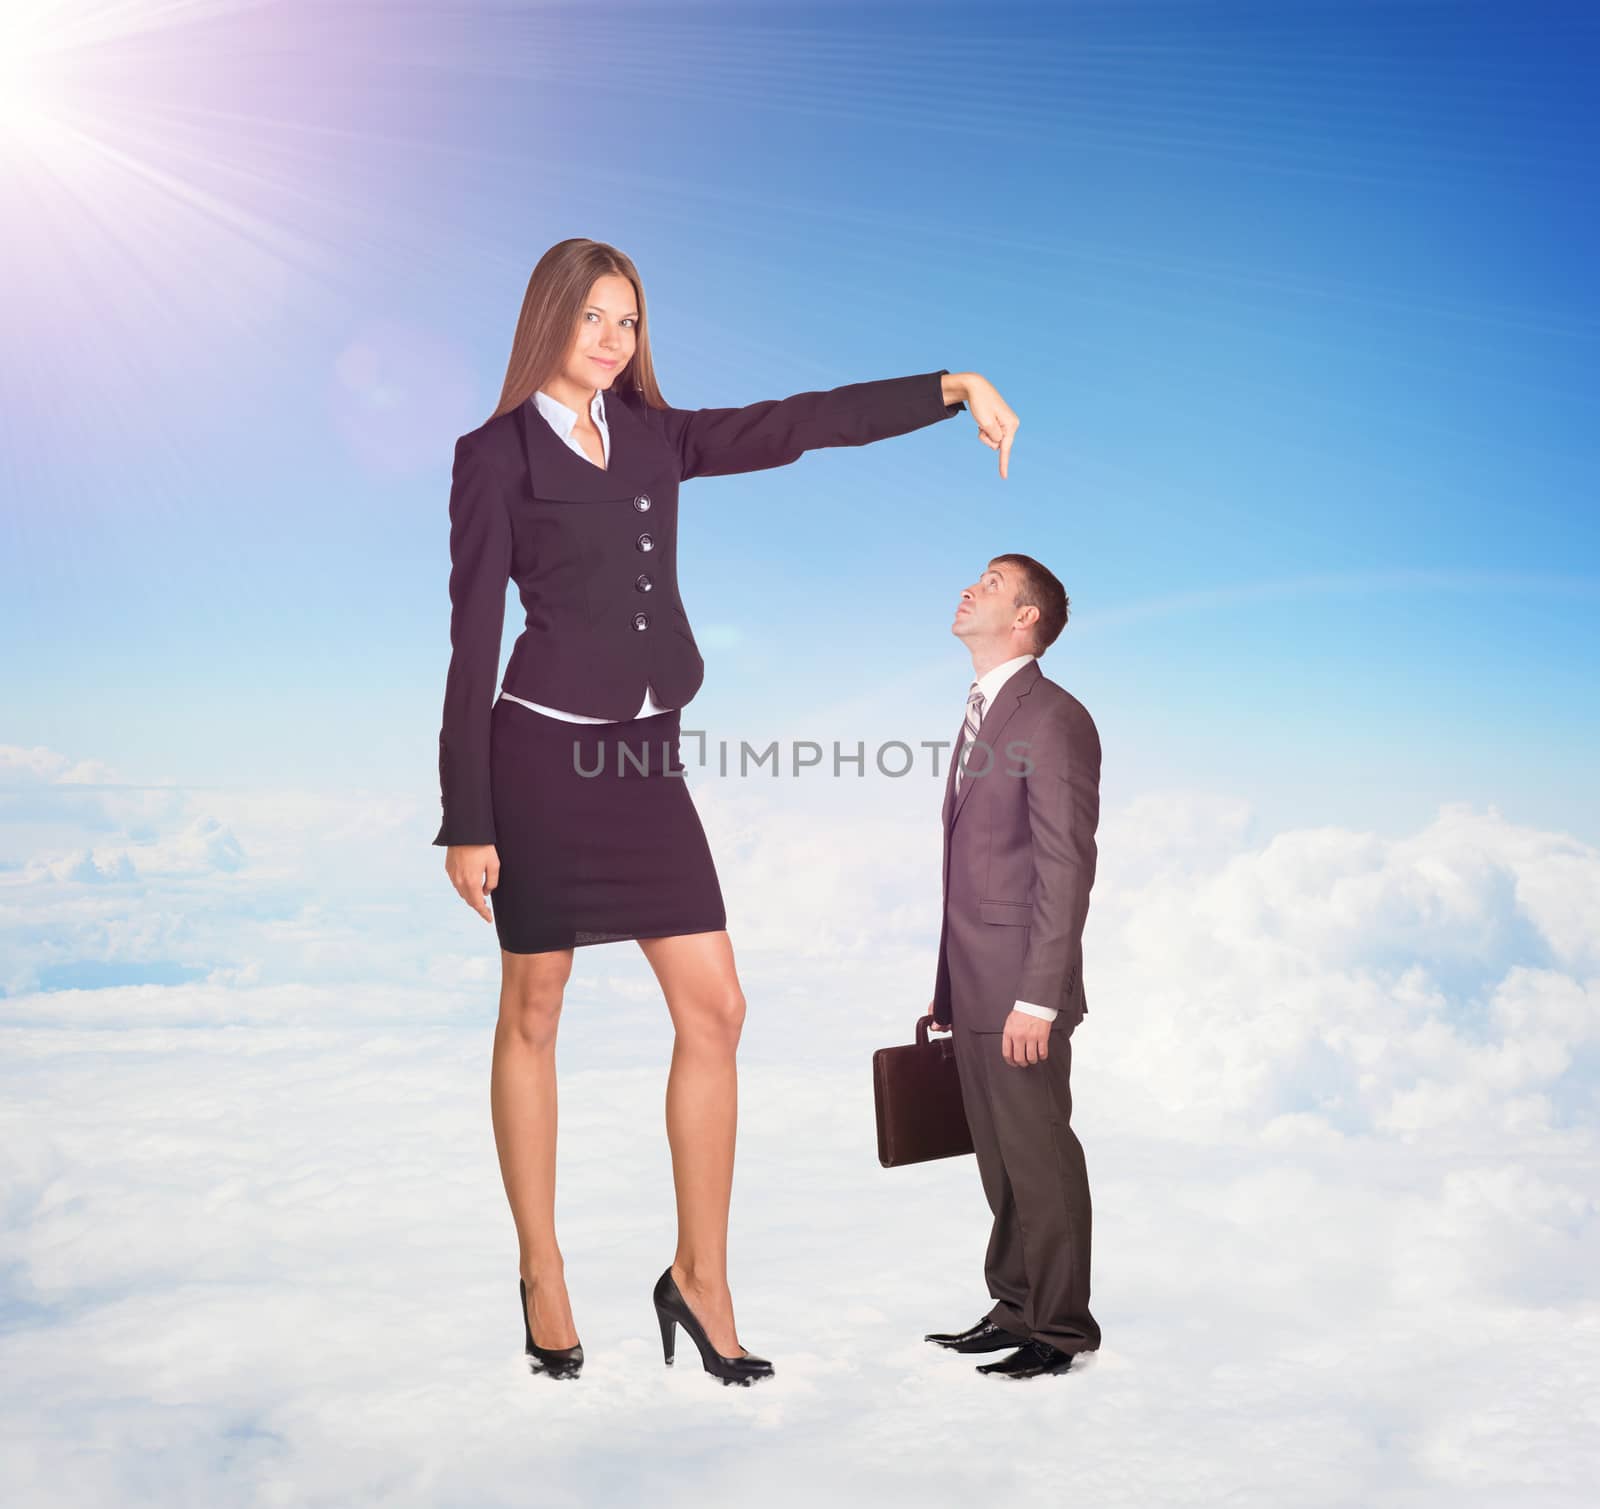 Small businessman looking up at large woman in suit. Clouds and cement surface as background. Business concept